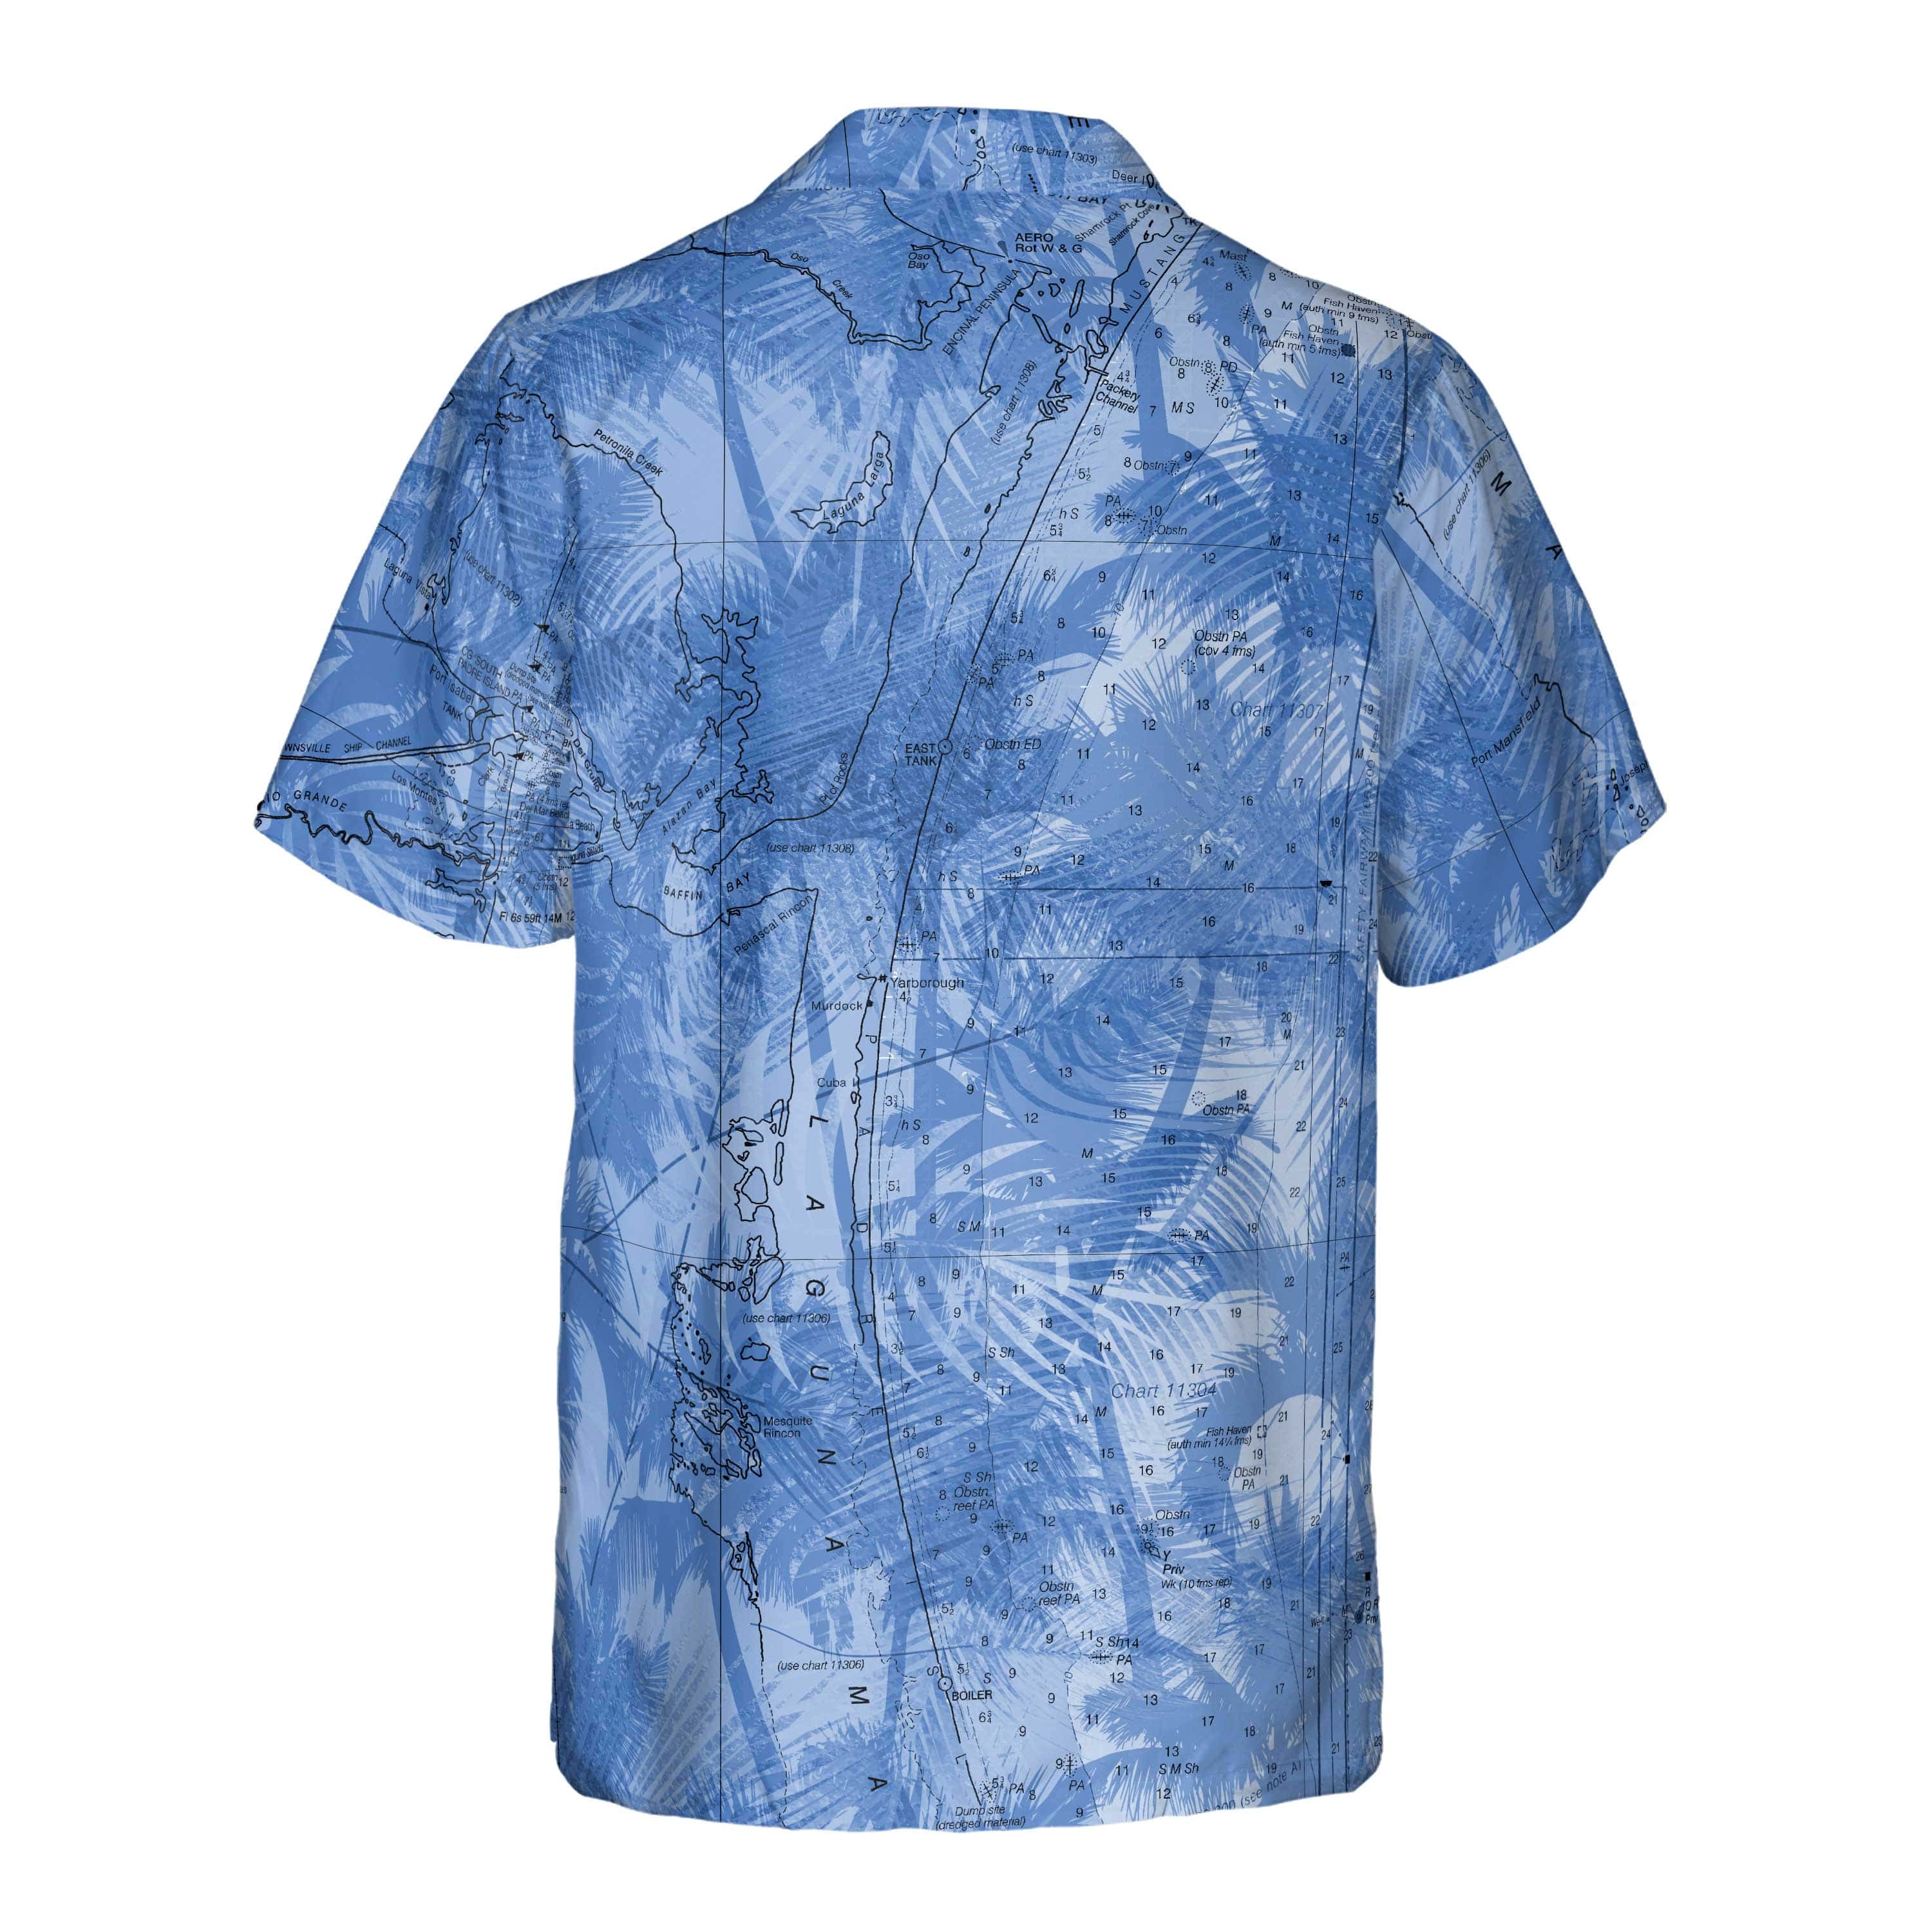 Discover Nautical Chart Attire from Top Deck Gear